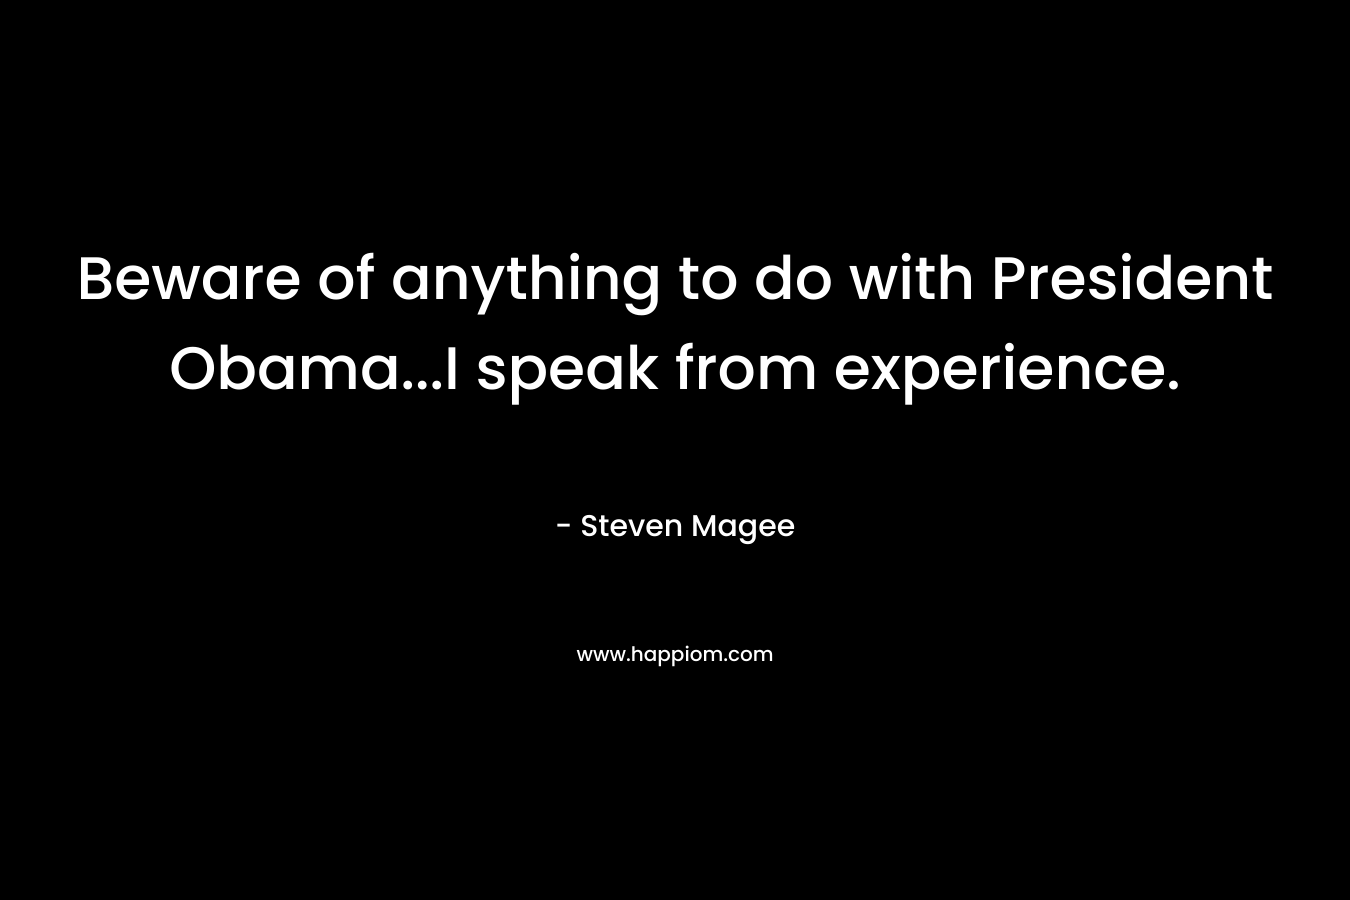 Beware of anything to do with President Obama...I speak from experience.